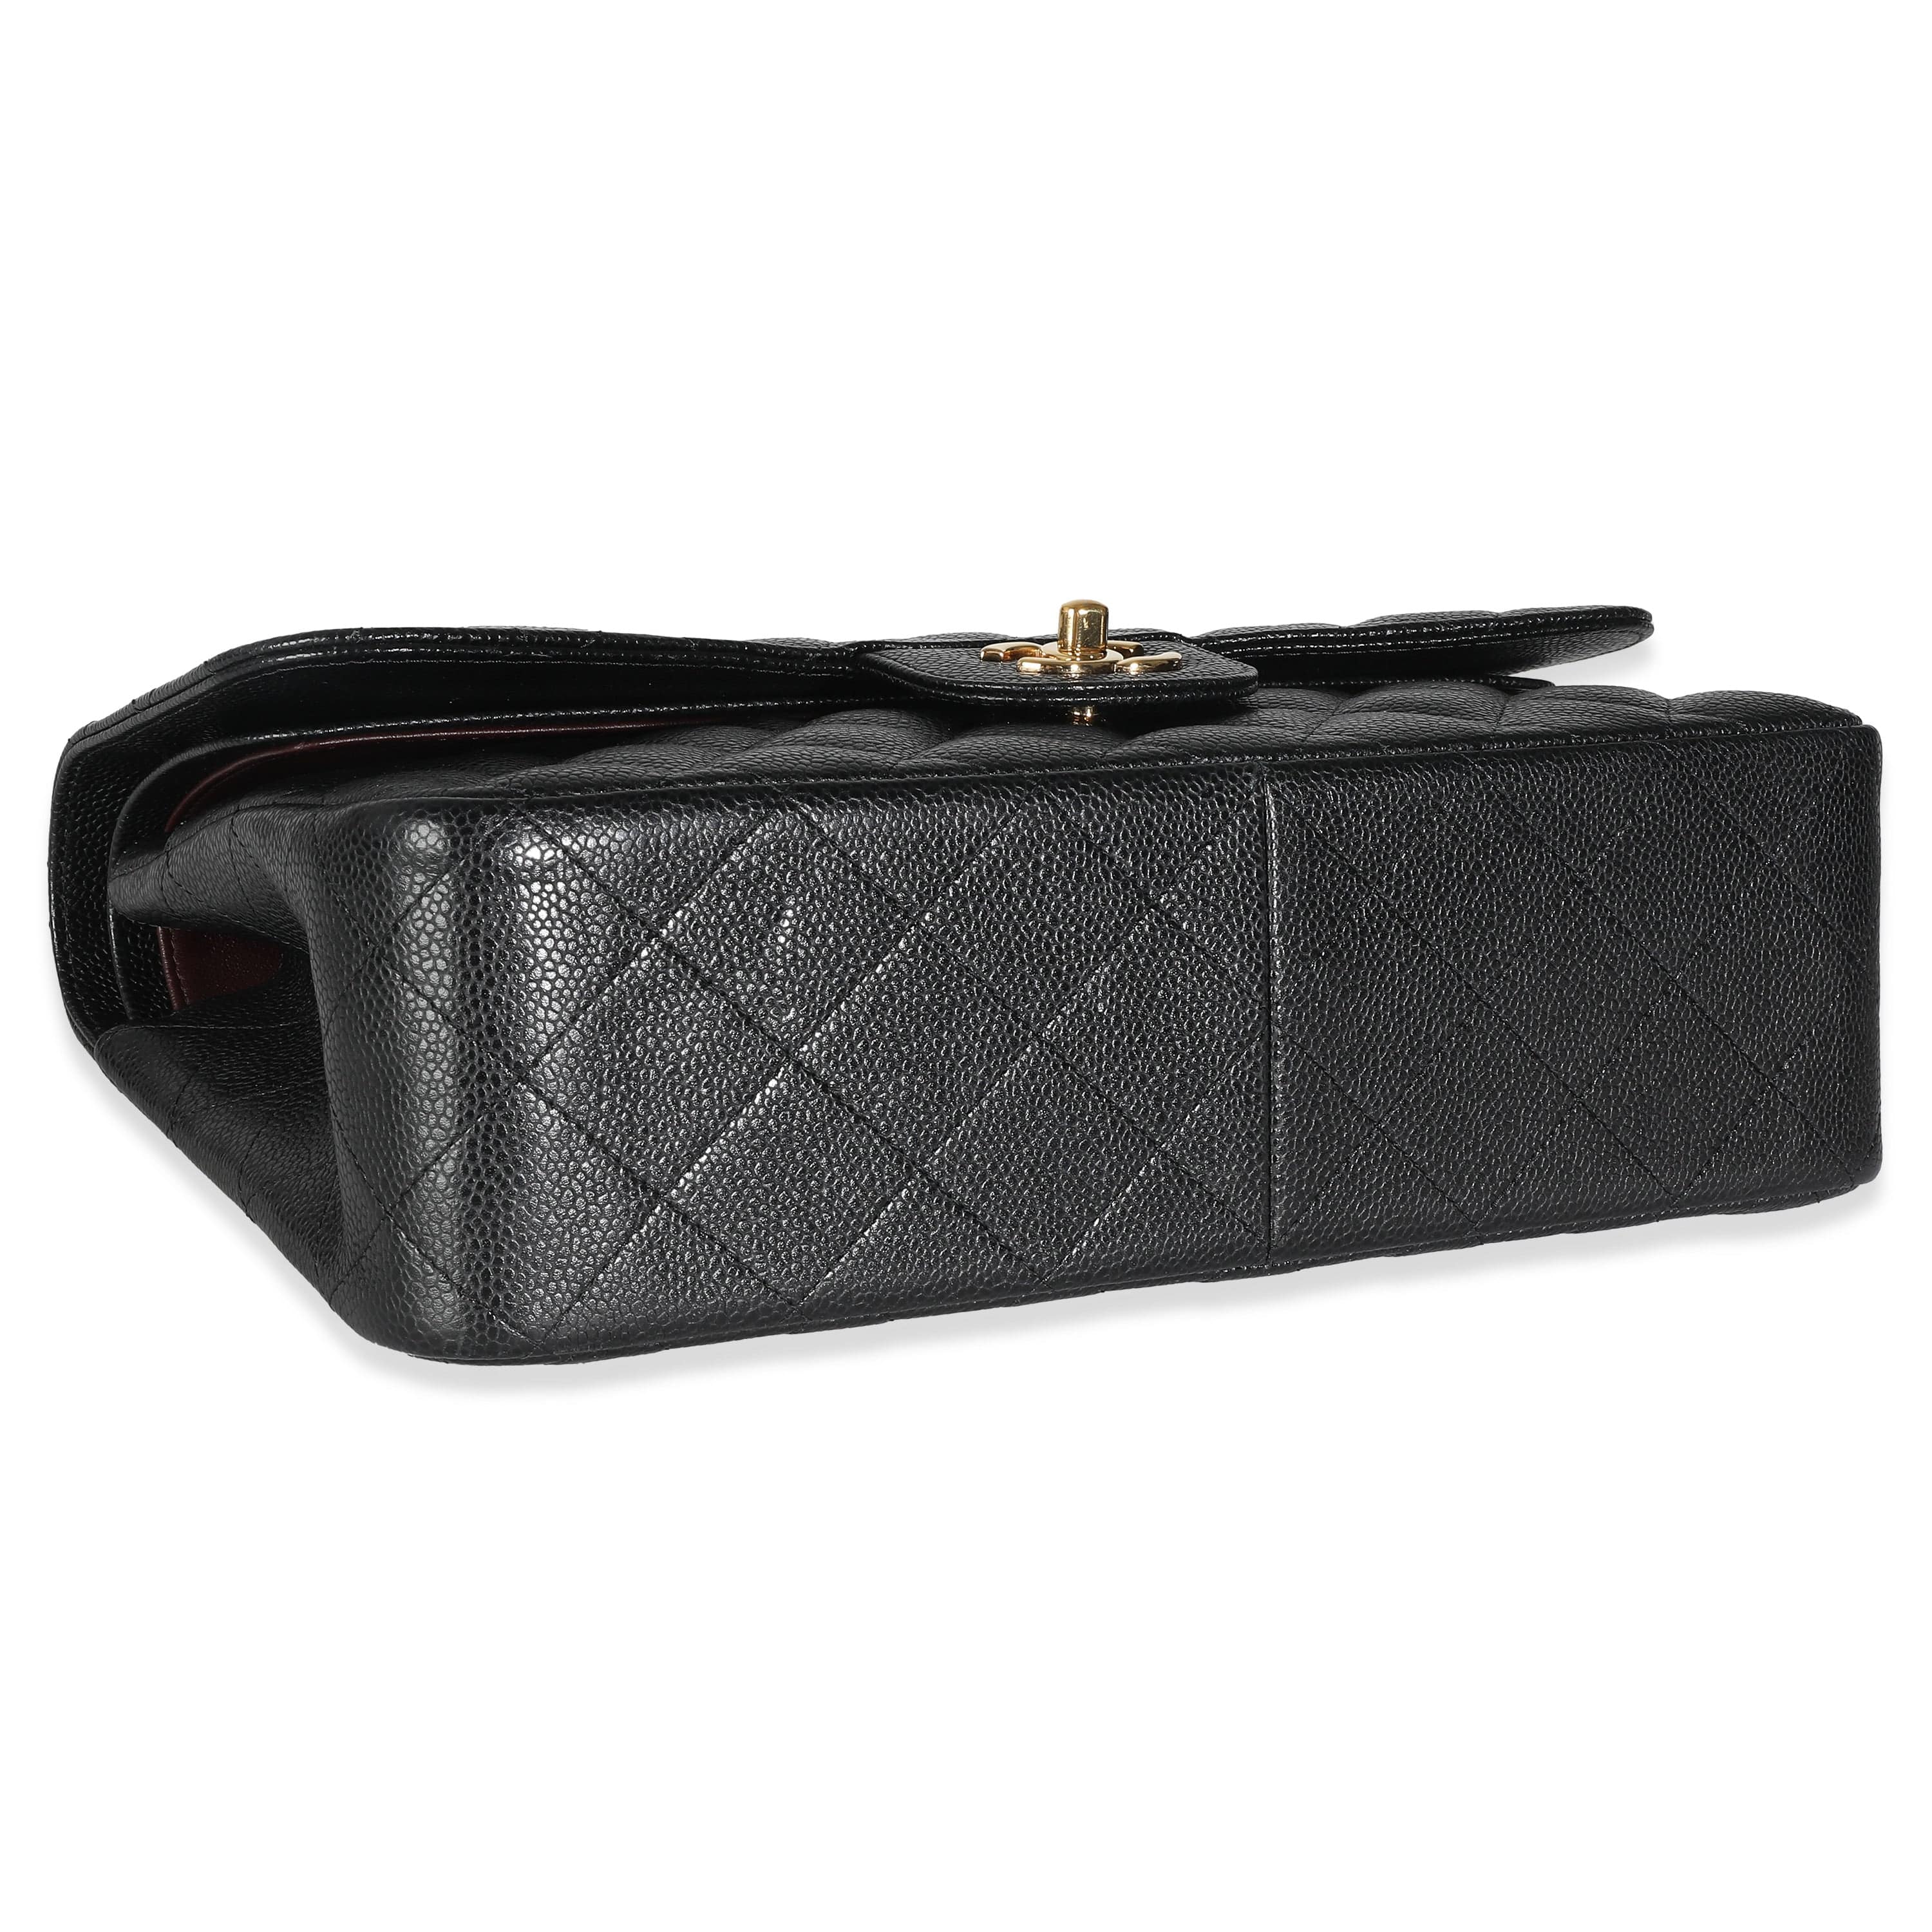 Chanel Chanel Black Quilted Caviar Jumbo Classic Double Flap Bag